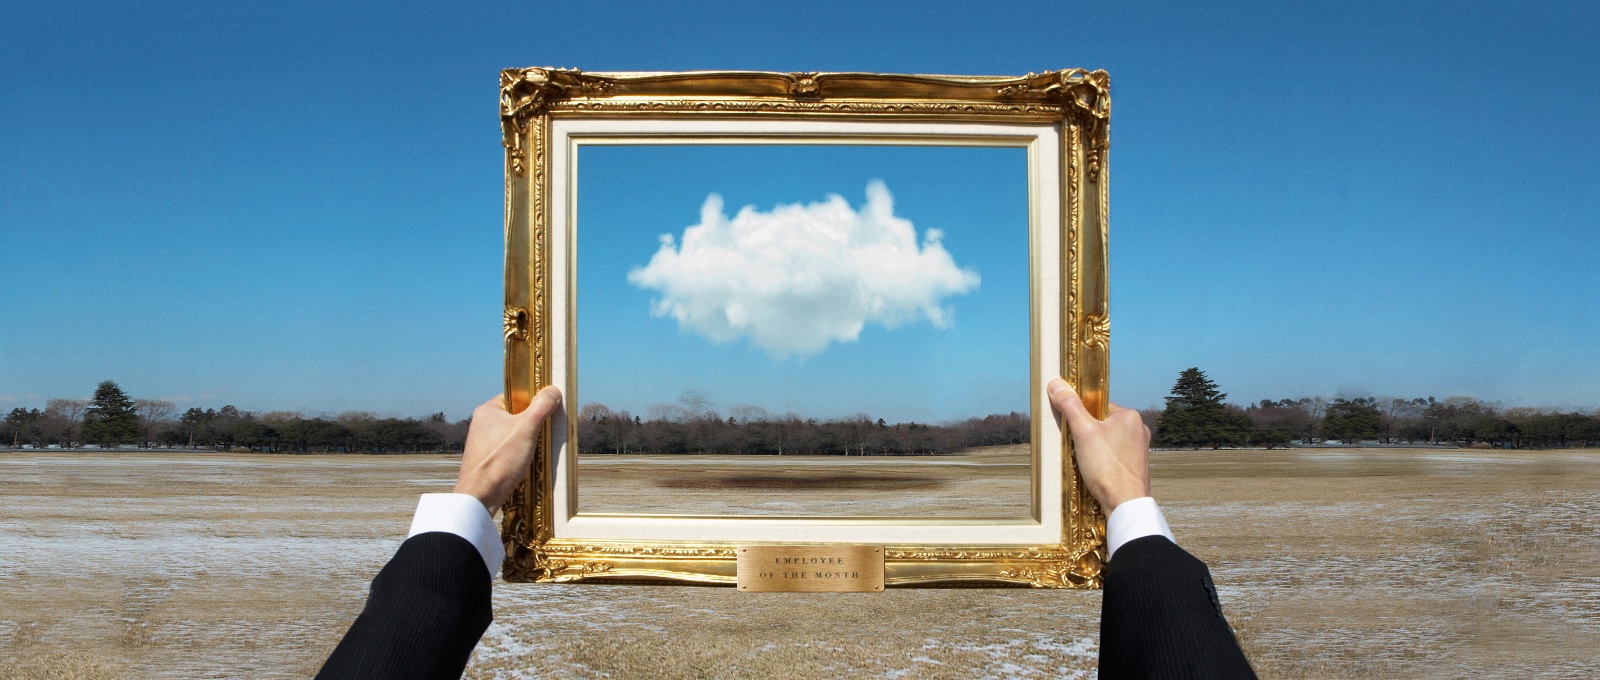 A pair of hands holding a golden decorative frame to highlight a single cloud in the distance